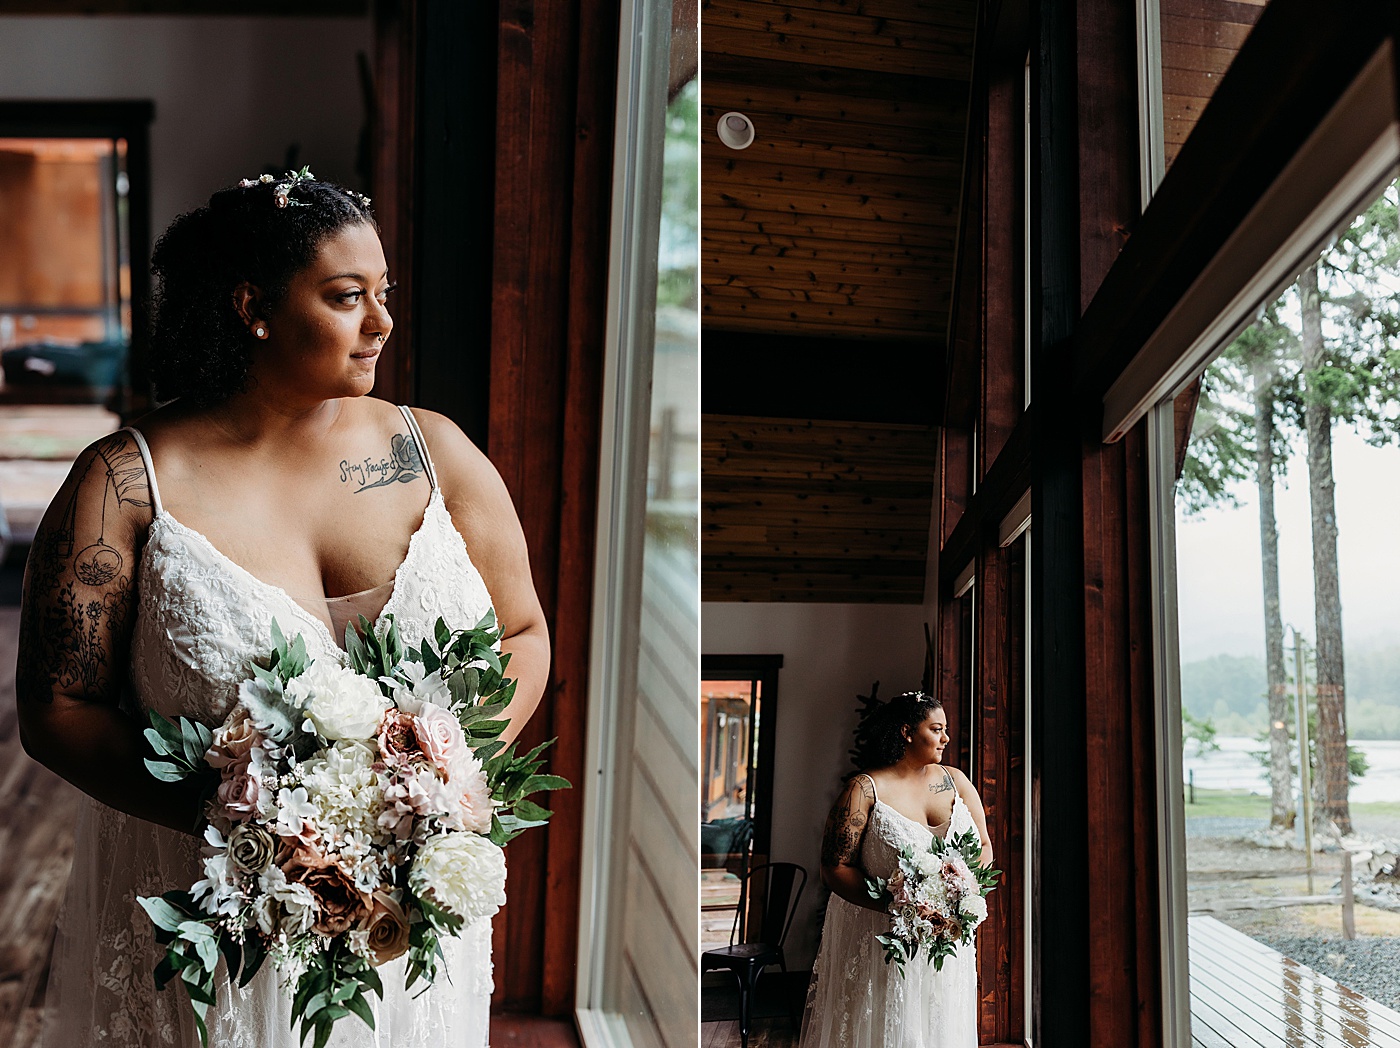 Bridal portraits in front of window in Airbnb cabin | Photo by Megan Montalvo Photography